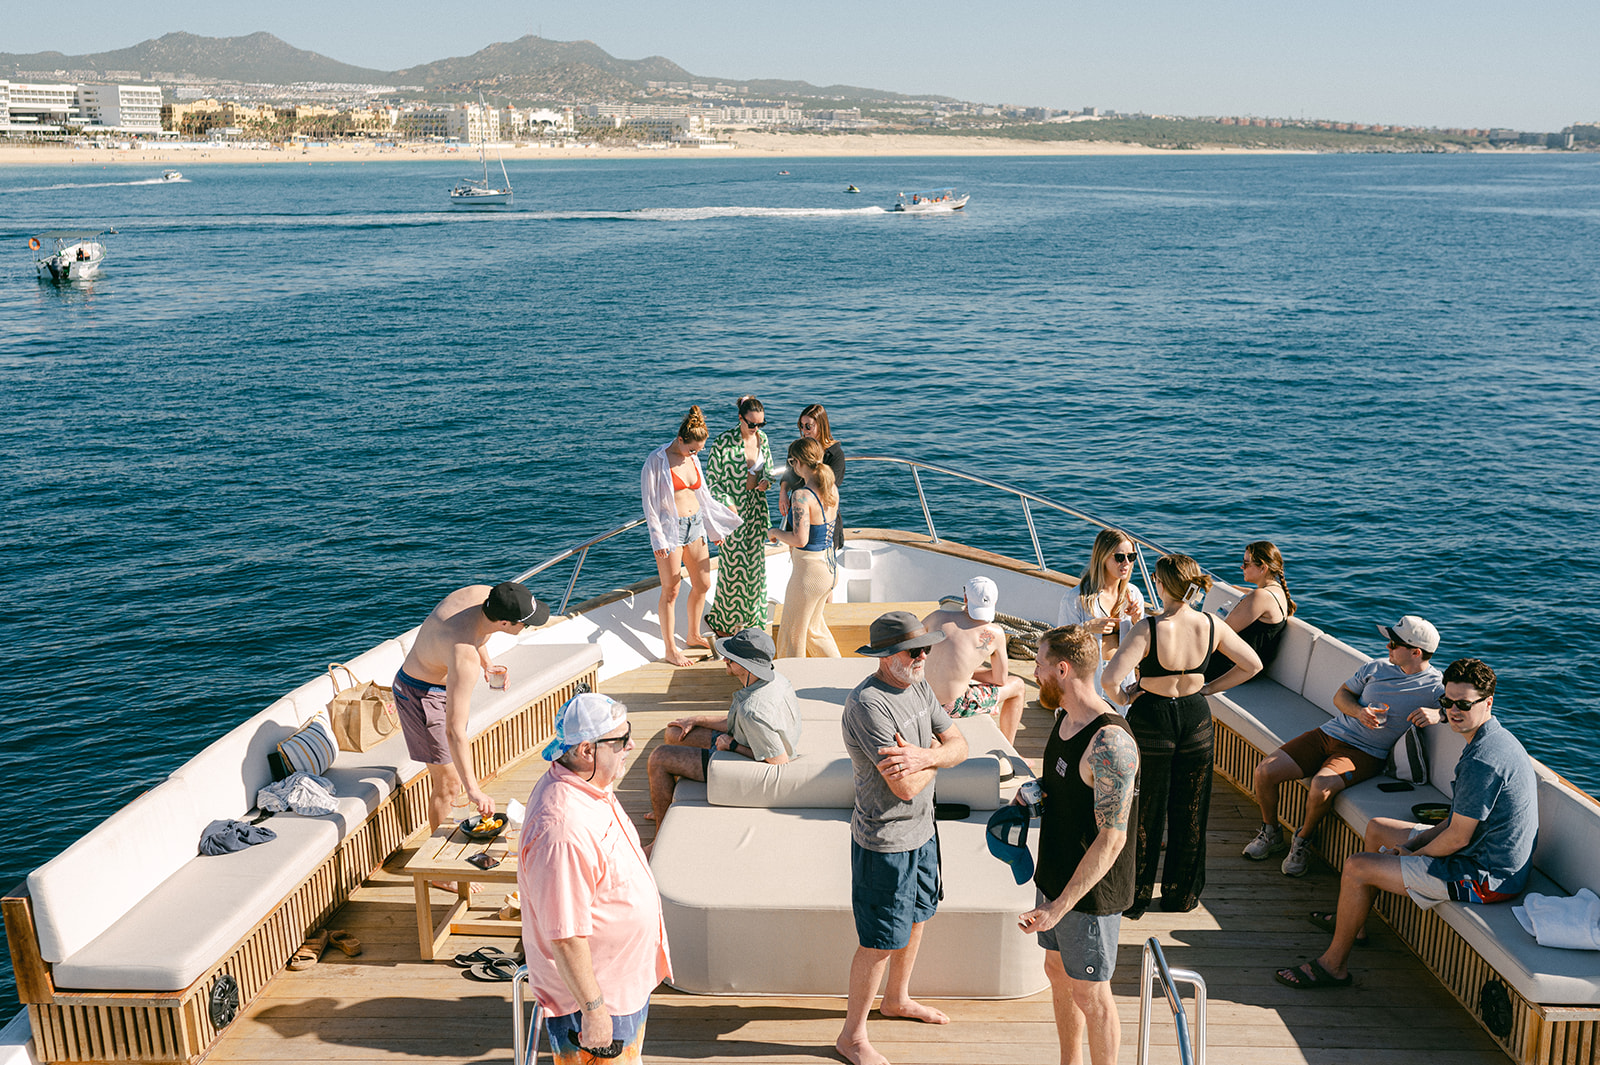 Wedding party on a private yacht in Mexico. 